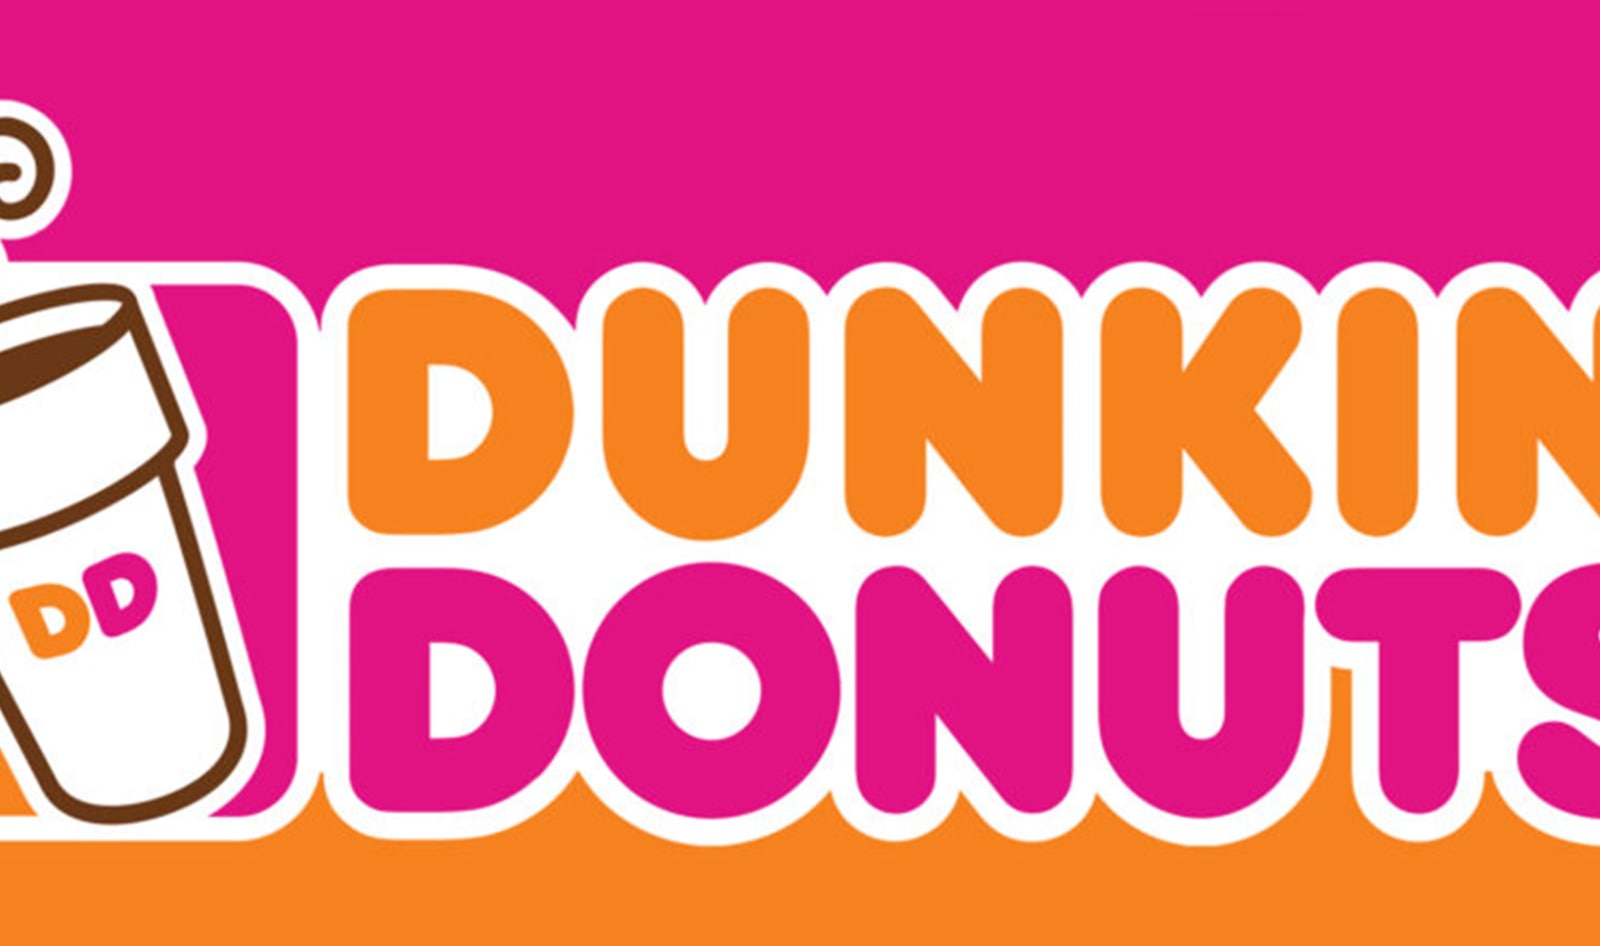 Dunkin’ Donuts CEO Assures Vegan Options Are on the Way